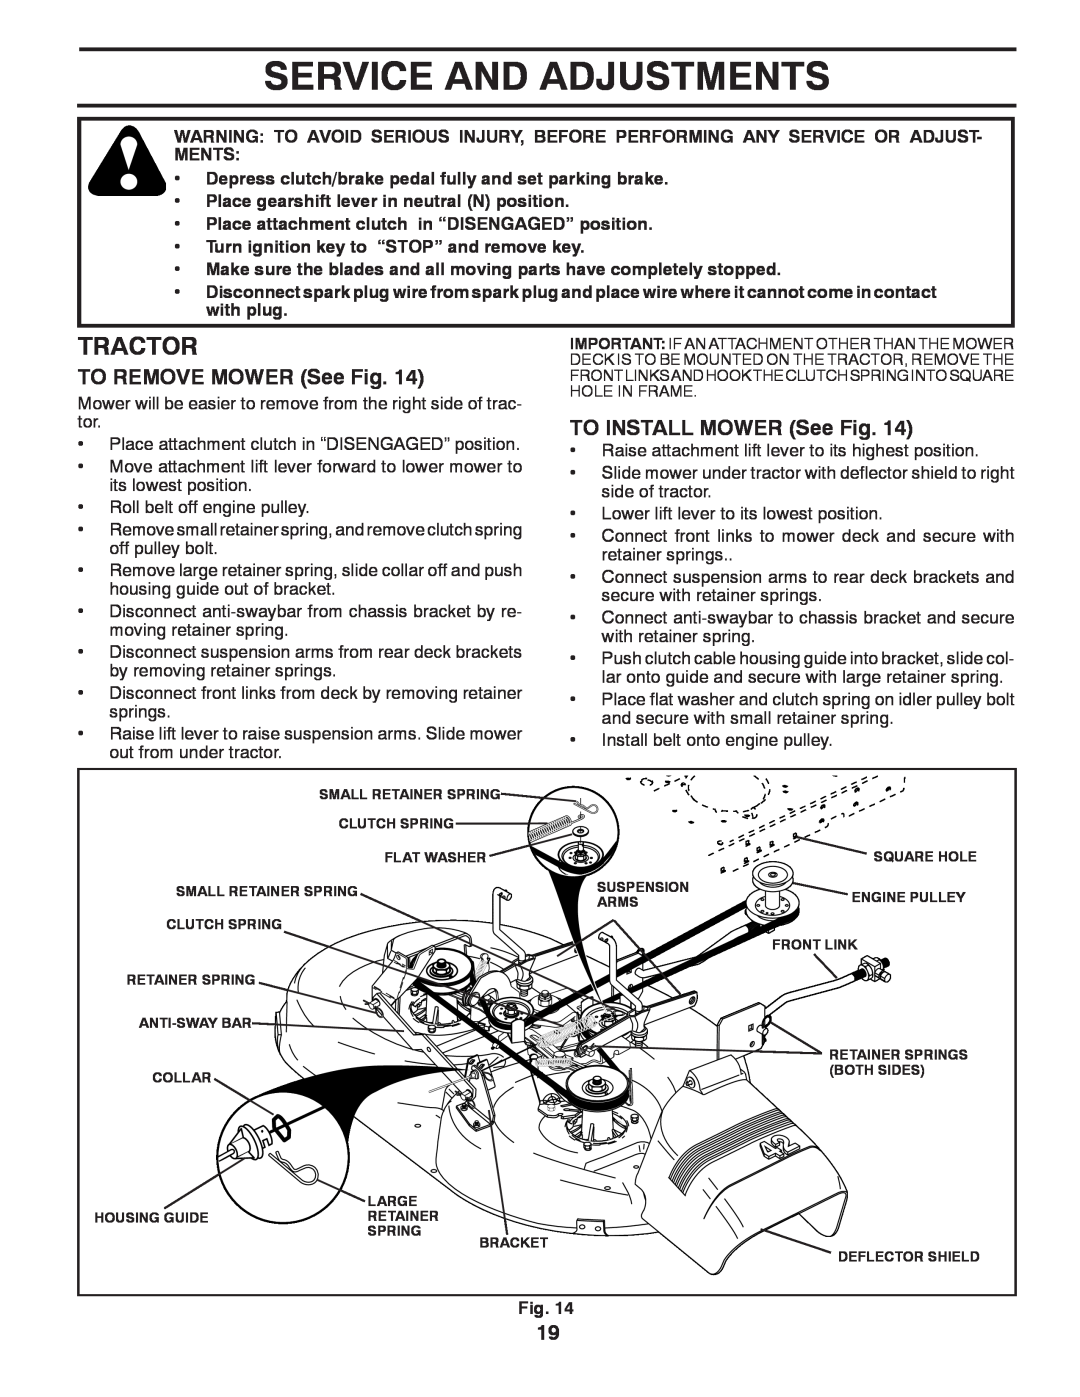 Poulan 96018000400, 532 43 88-98 manual Service And Adjustments, TO REMOVE MOWER See Fig, TO INSTALL MOWER See Fig, Tractor 